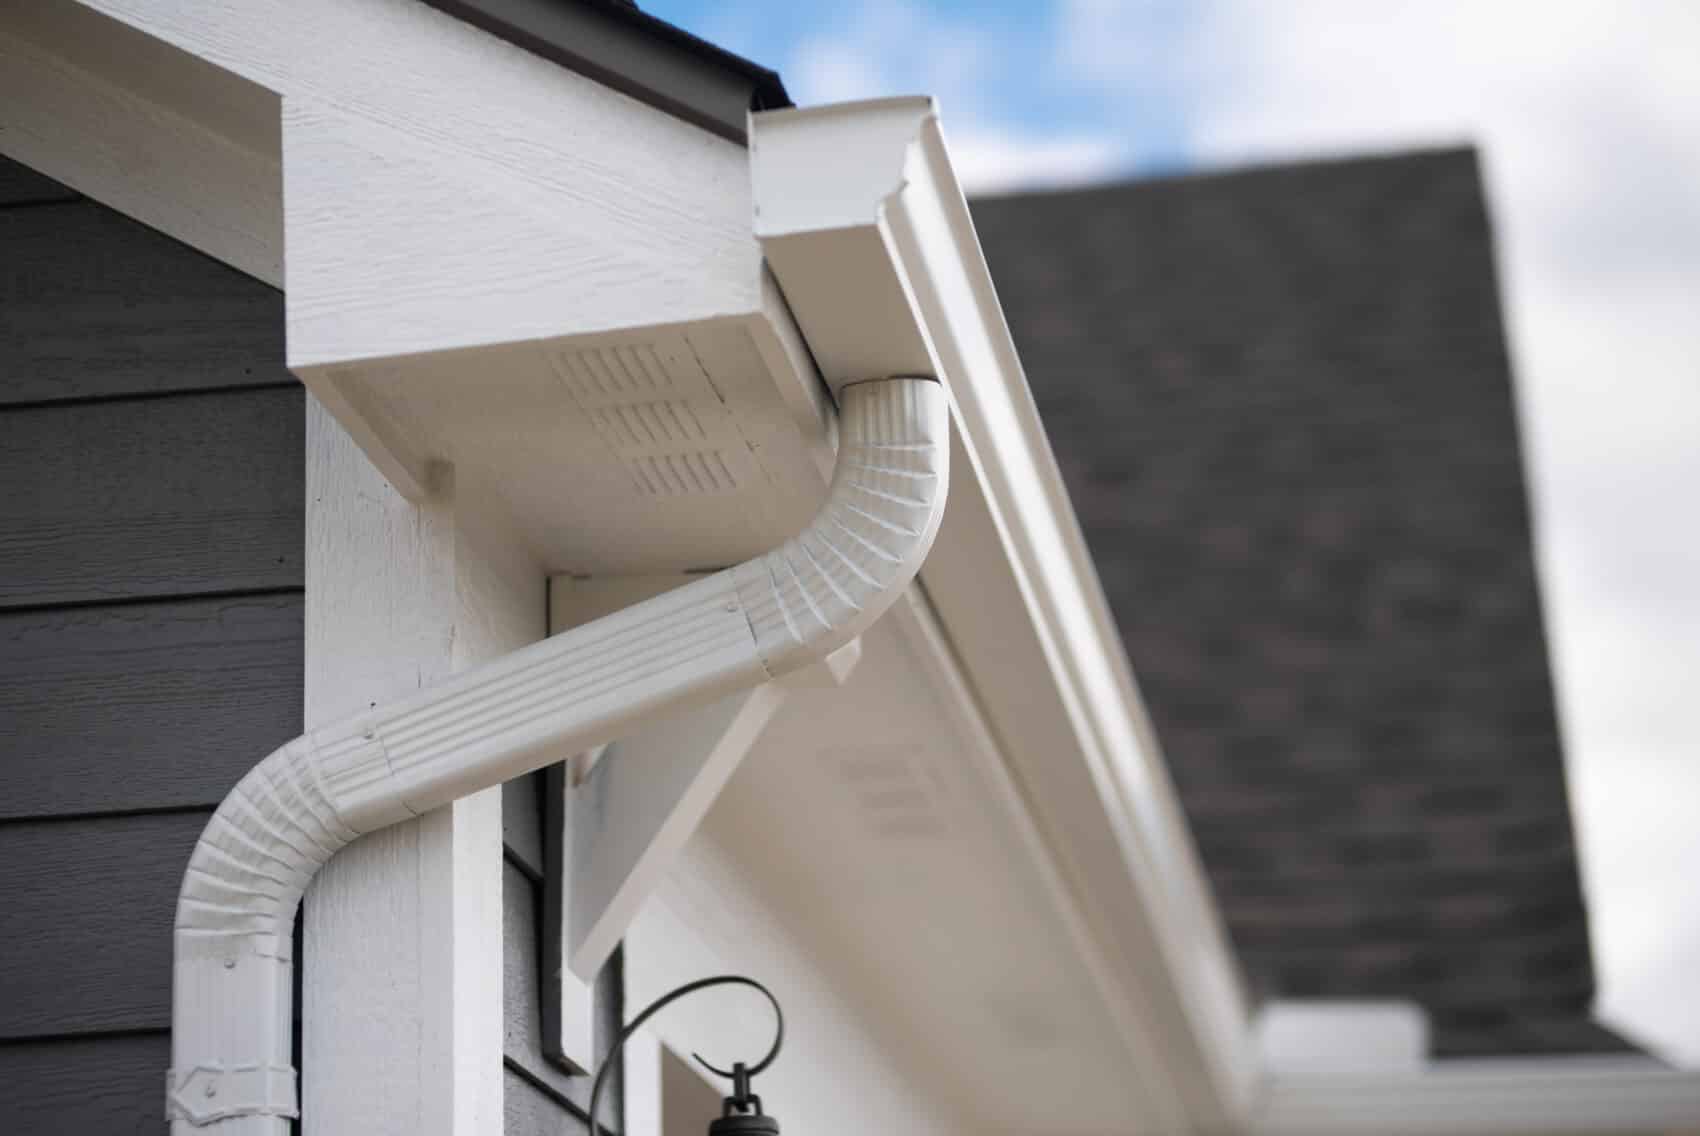 White gutters at the corner of a home's roof.